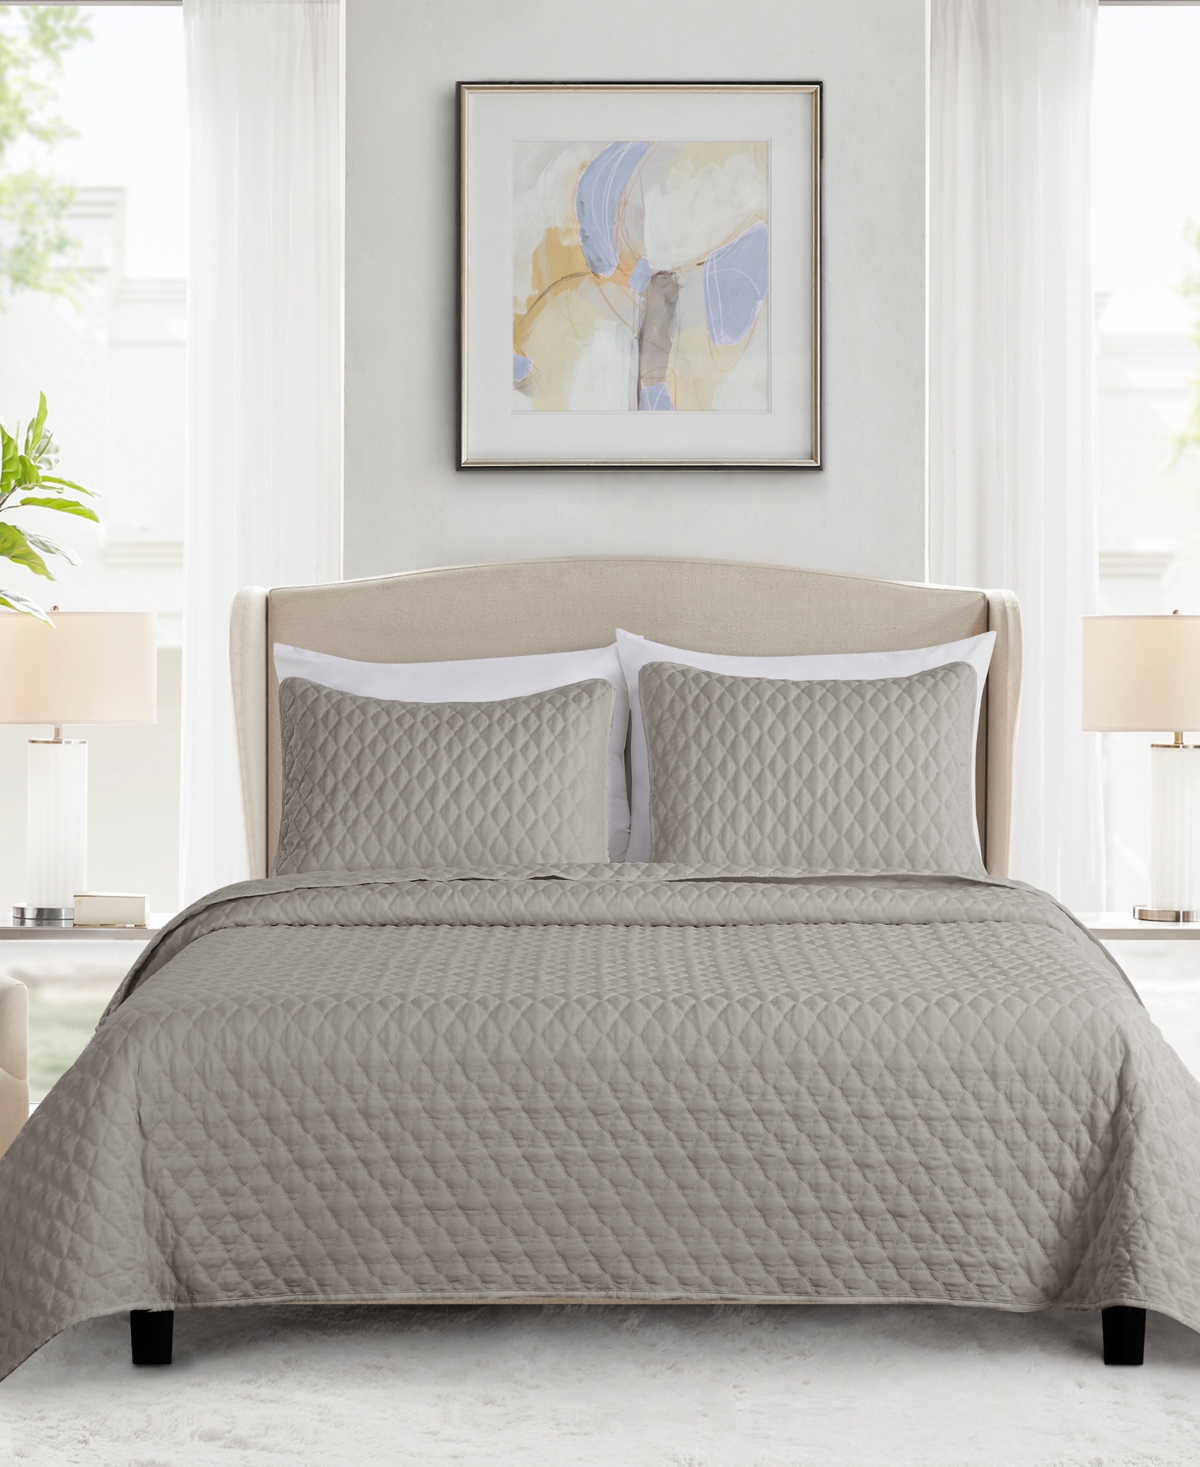 Videri Home Diamond Stitched 3 Piece Quilt Set, Full-queen In Gray